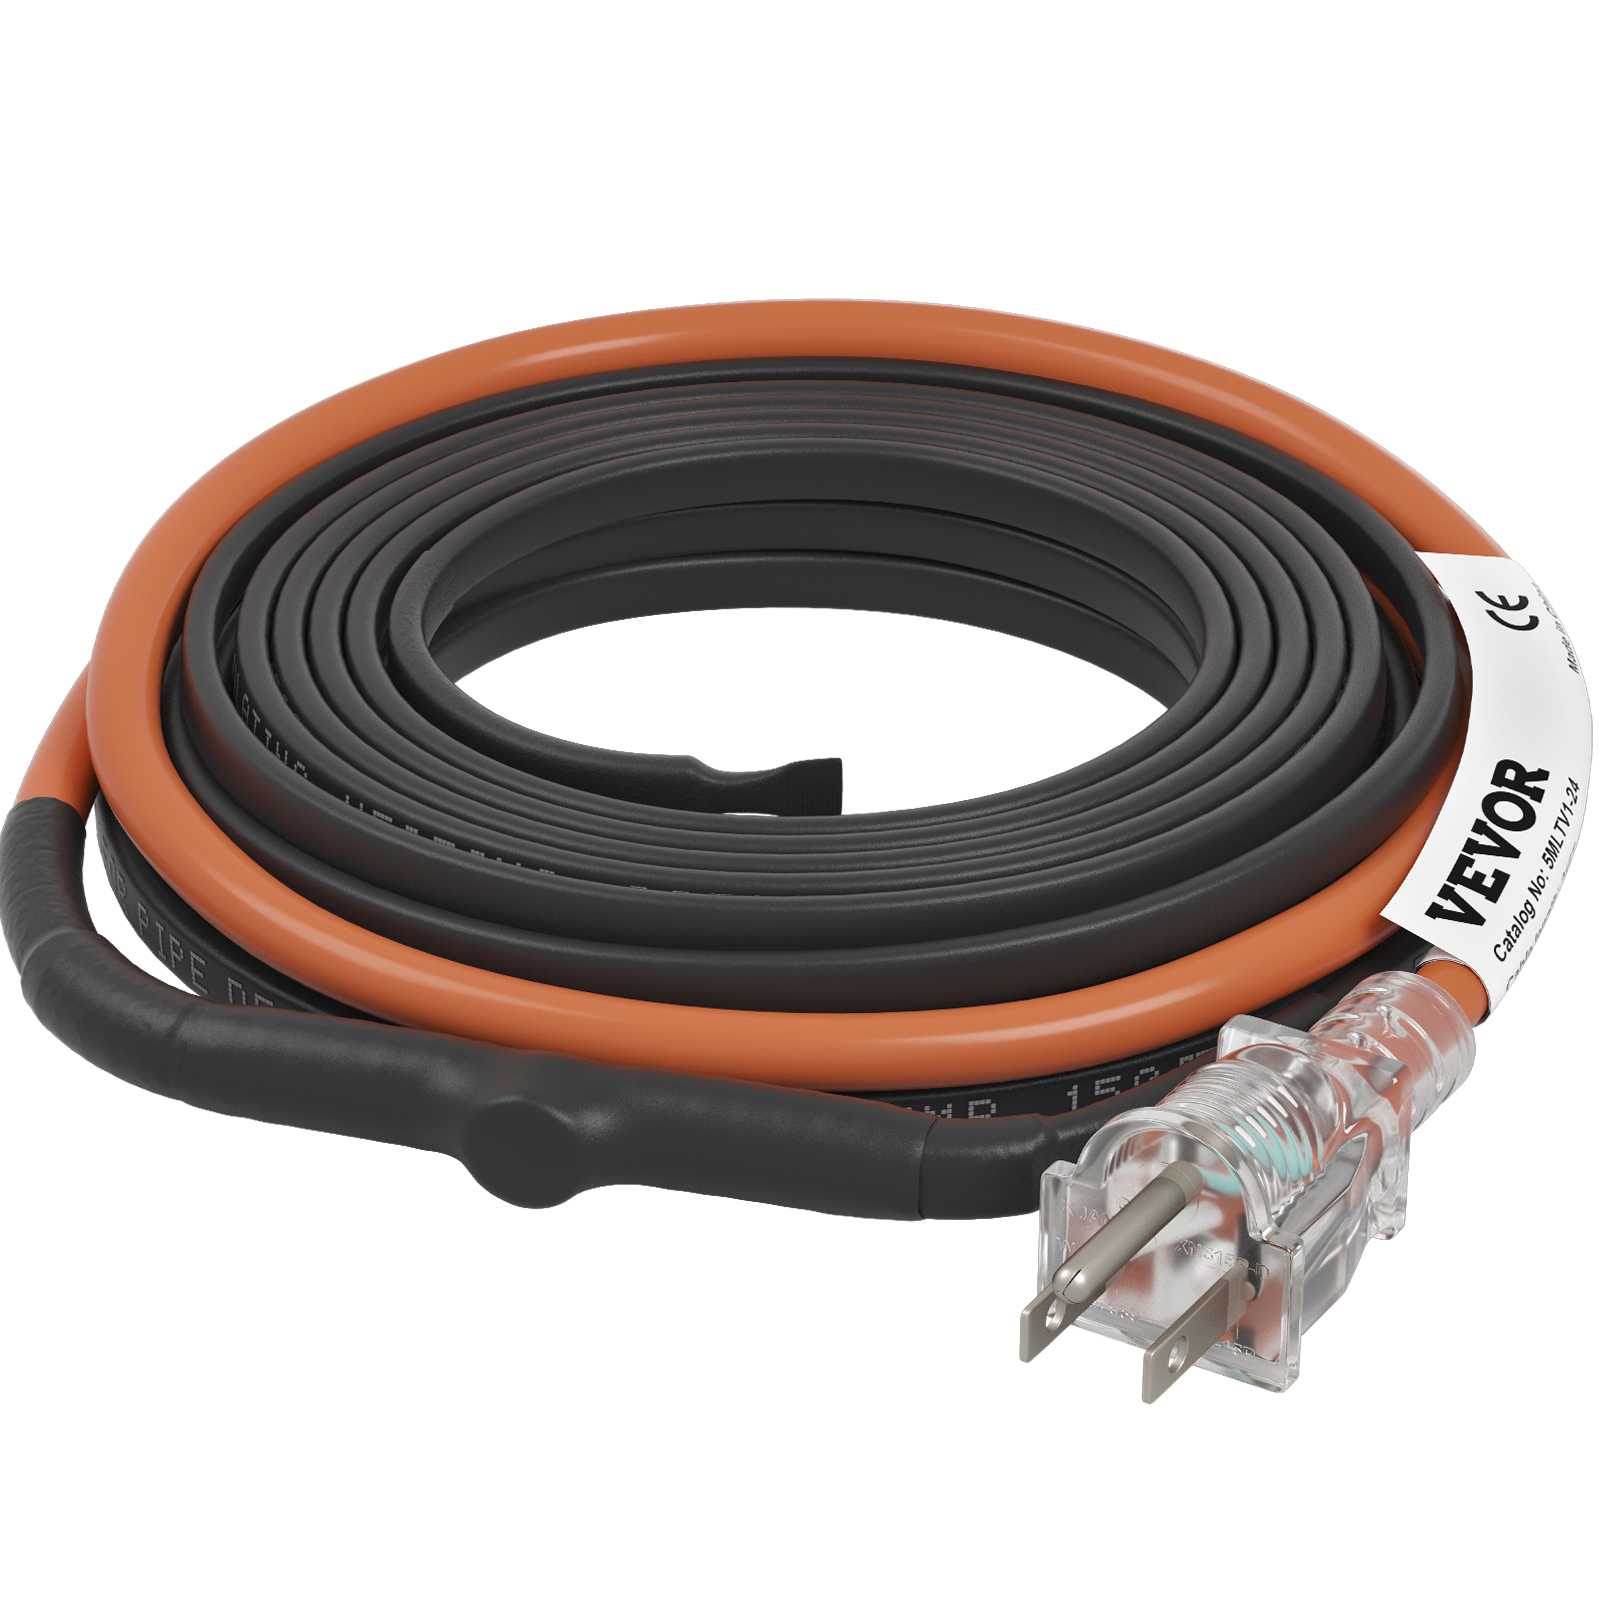 pipe heating cable,80ft,5W/ft